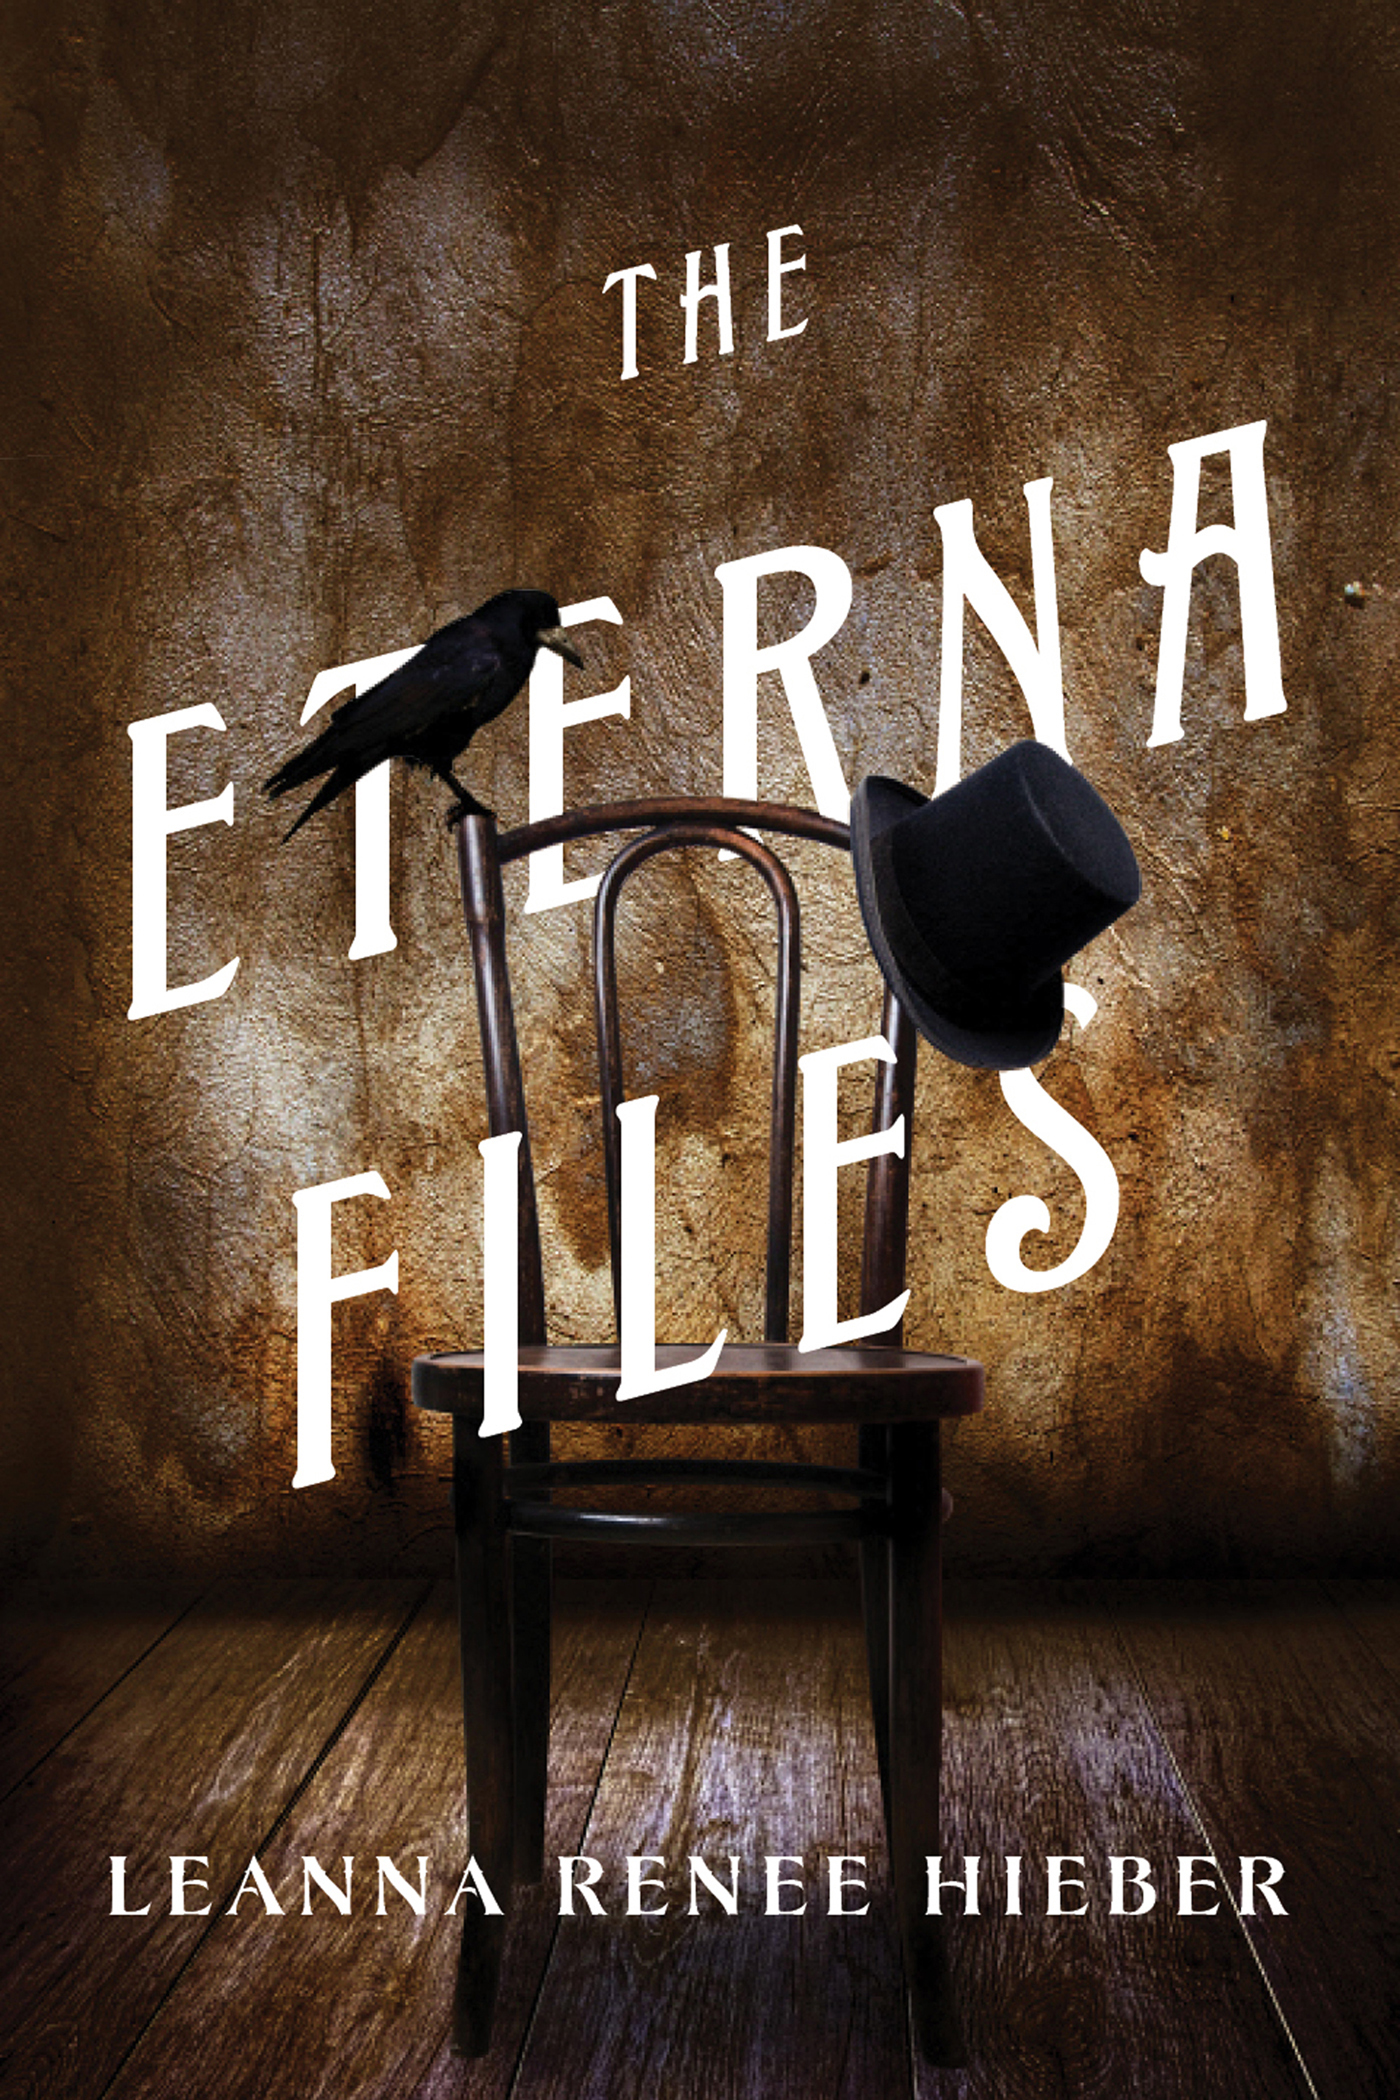 The Eterna Files : The Eterna Files #1 by Leanna Renee Hieber